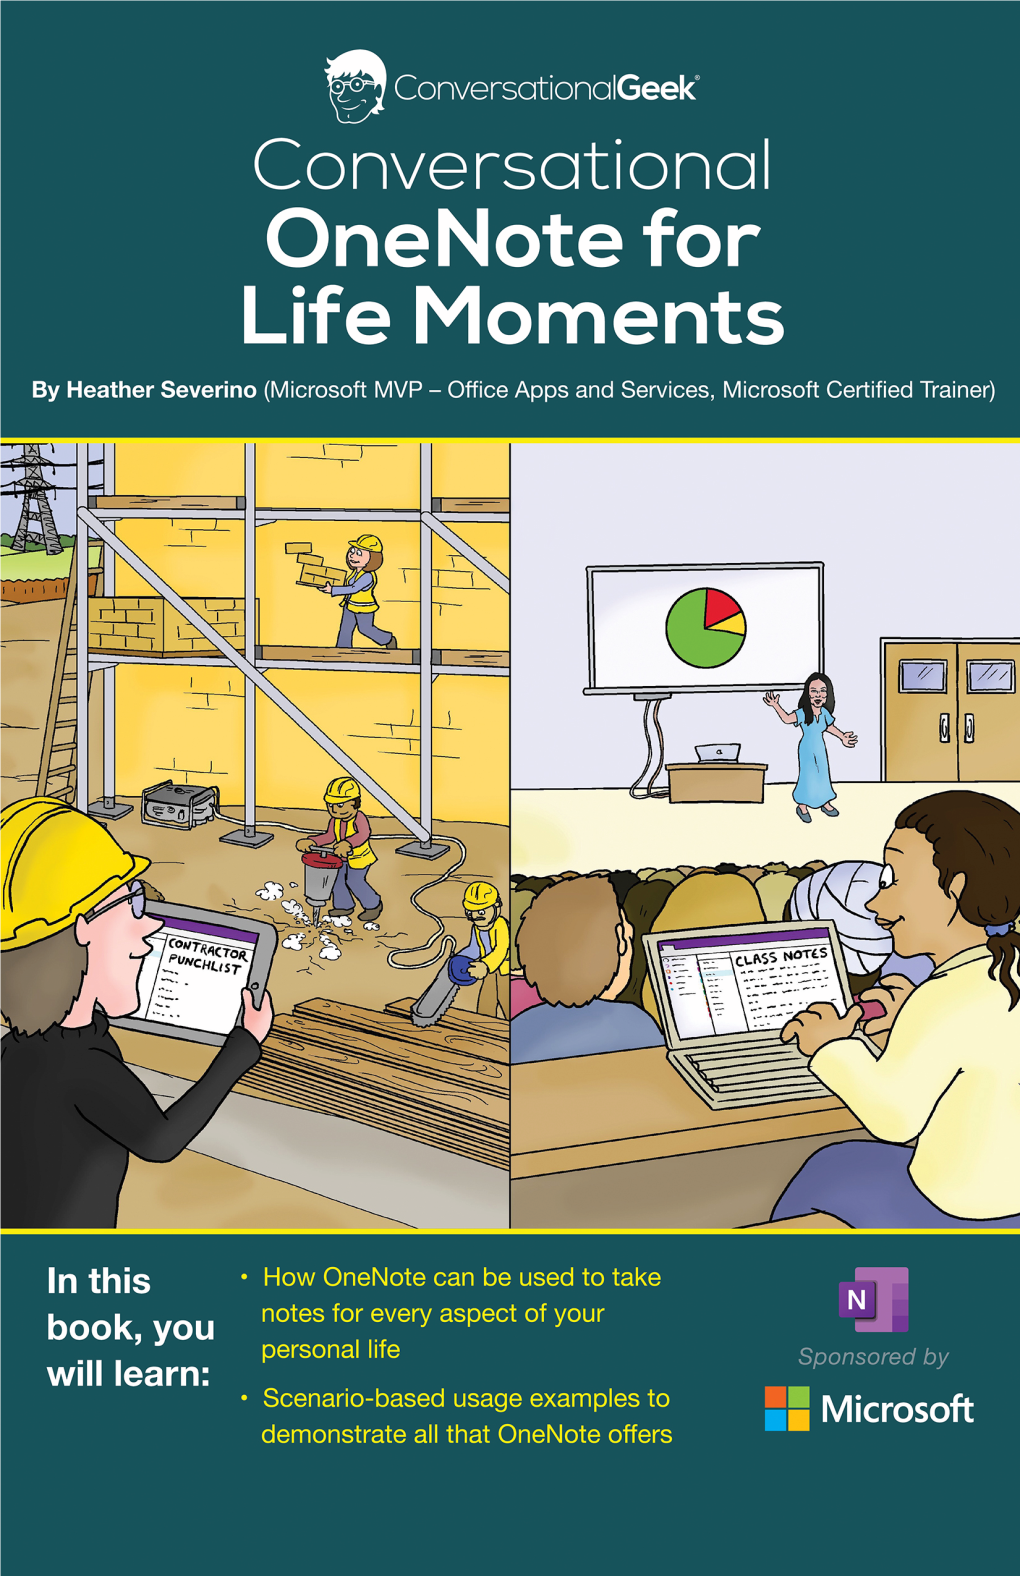 Onenote for Life Moments by Heather Severino © 2020 Conversational Geek